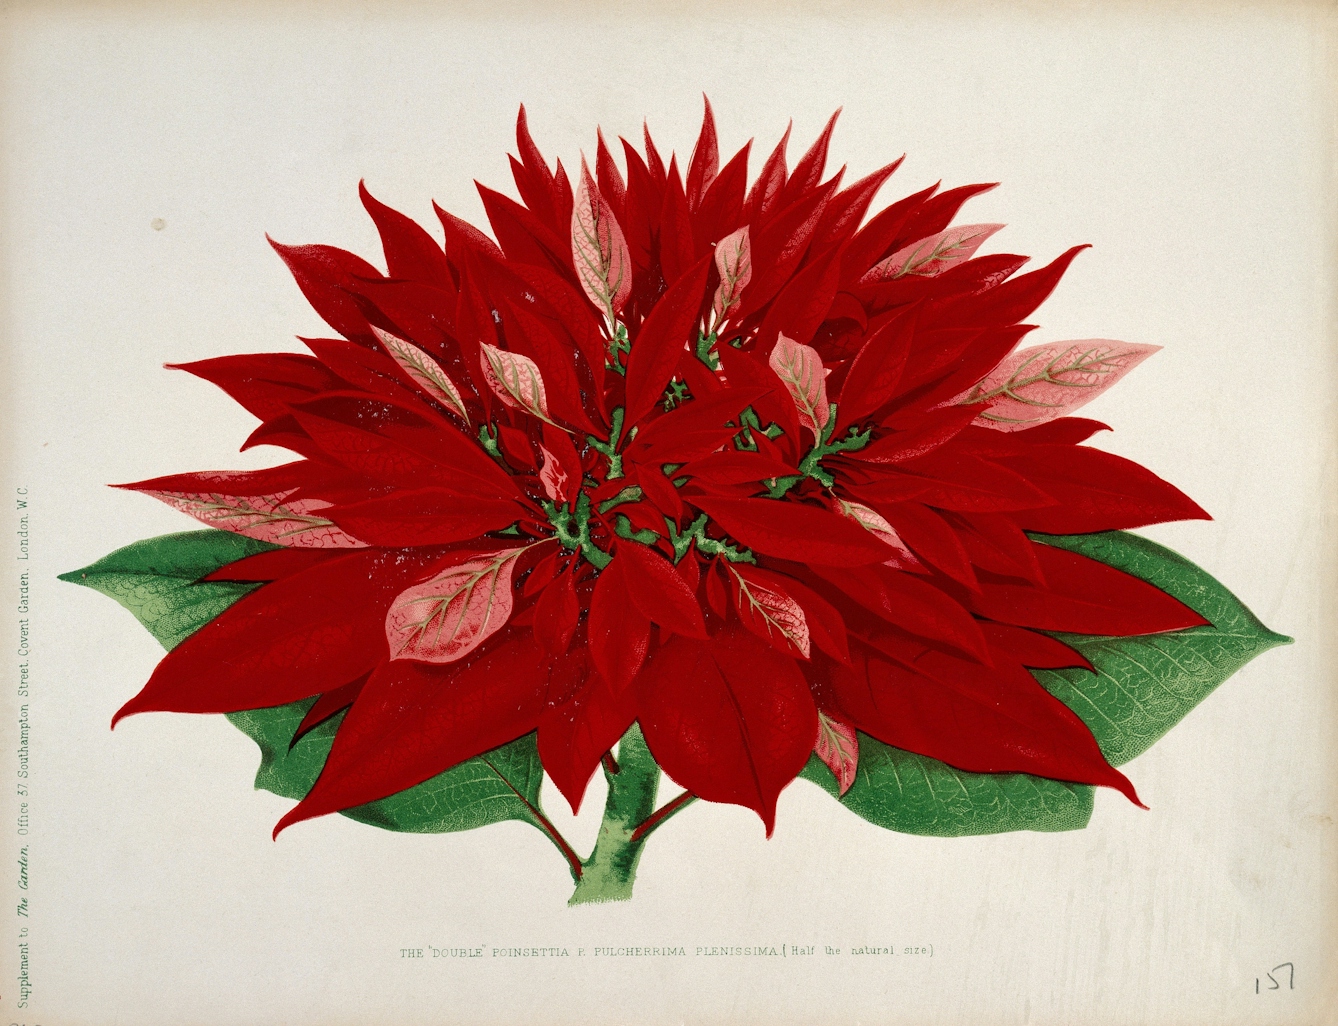 Illustration of a double flowered poinsettia